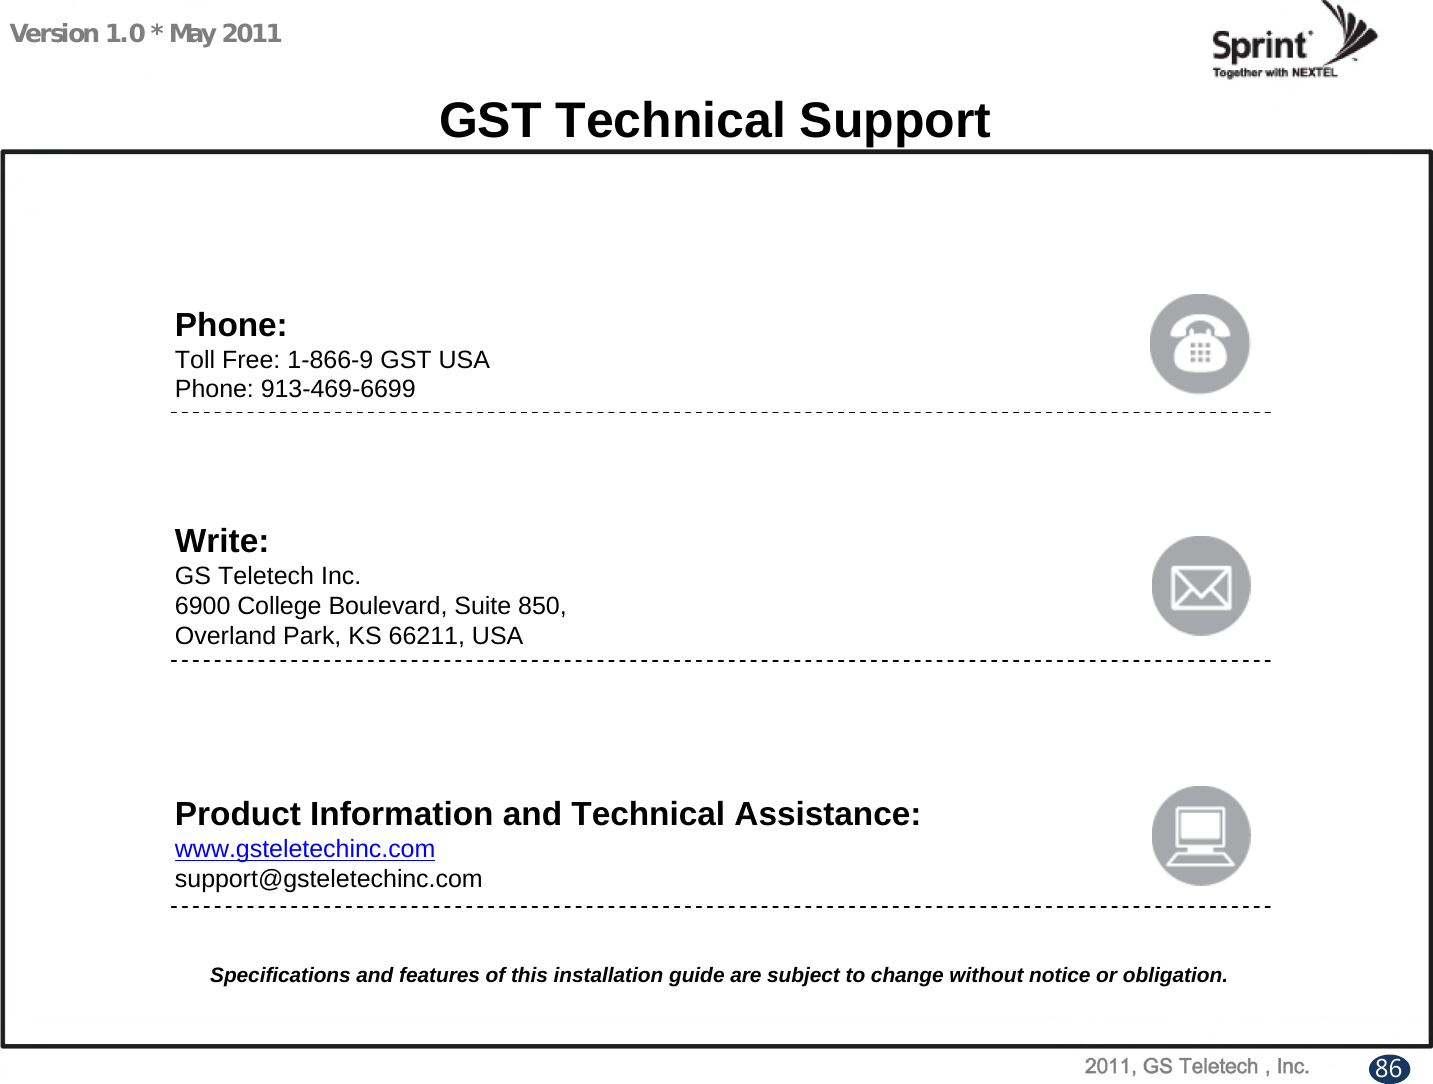 Version 1.0 * May 2011GST Technical SupportPhone:Toll Free: 1-866-9 GST USAPhone: 913-469-6699Write:GS Teletech Inc.6900 College Boulevard, Suite 850, Overland Park, KS 66211, USAProduct Information and Technical Assistance:www.gsteletechinc.comsupport@gsteletechinc.comSpecifications and features of this installation guide are subject to change without notice or obligation.86